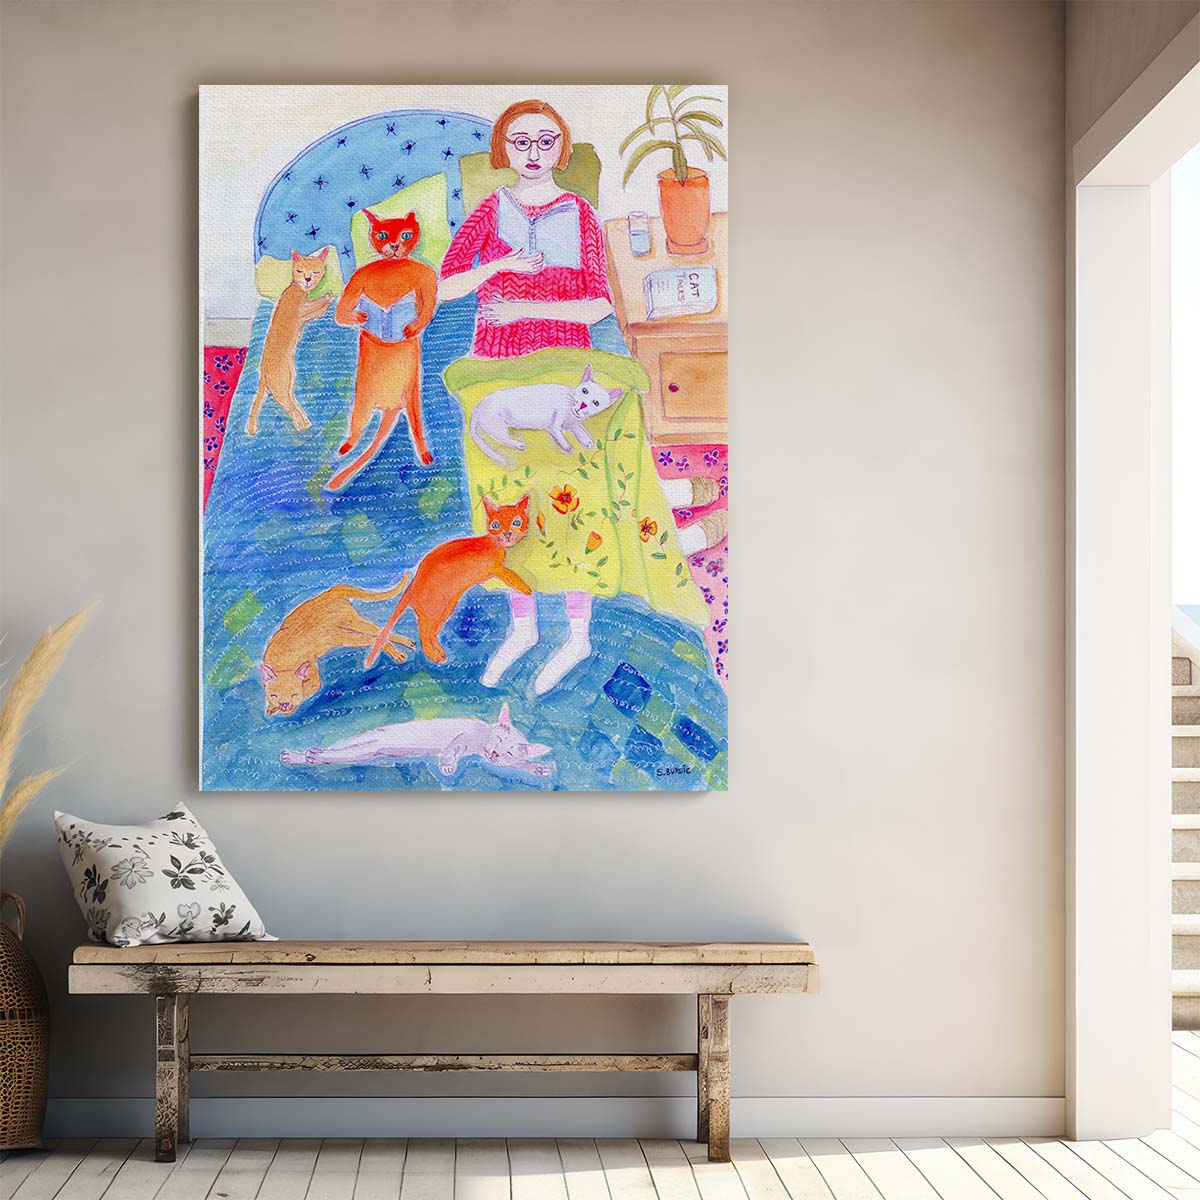 Colorful Humorous Illustration of Woman, Cat and Bedtime Ritual by Luxuriance Designs, made in USA